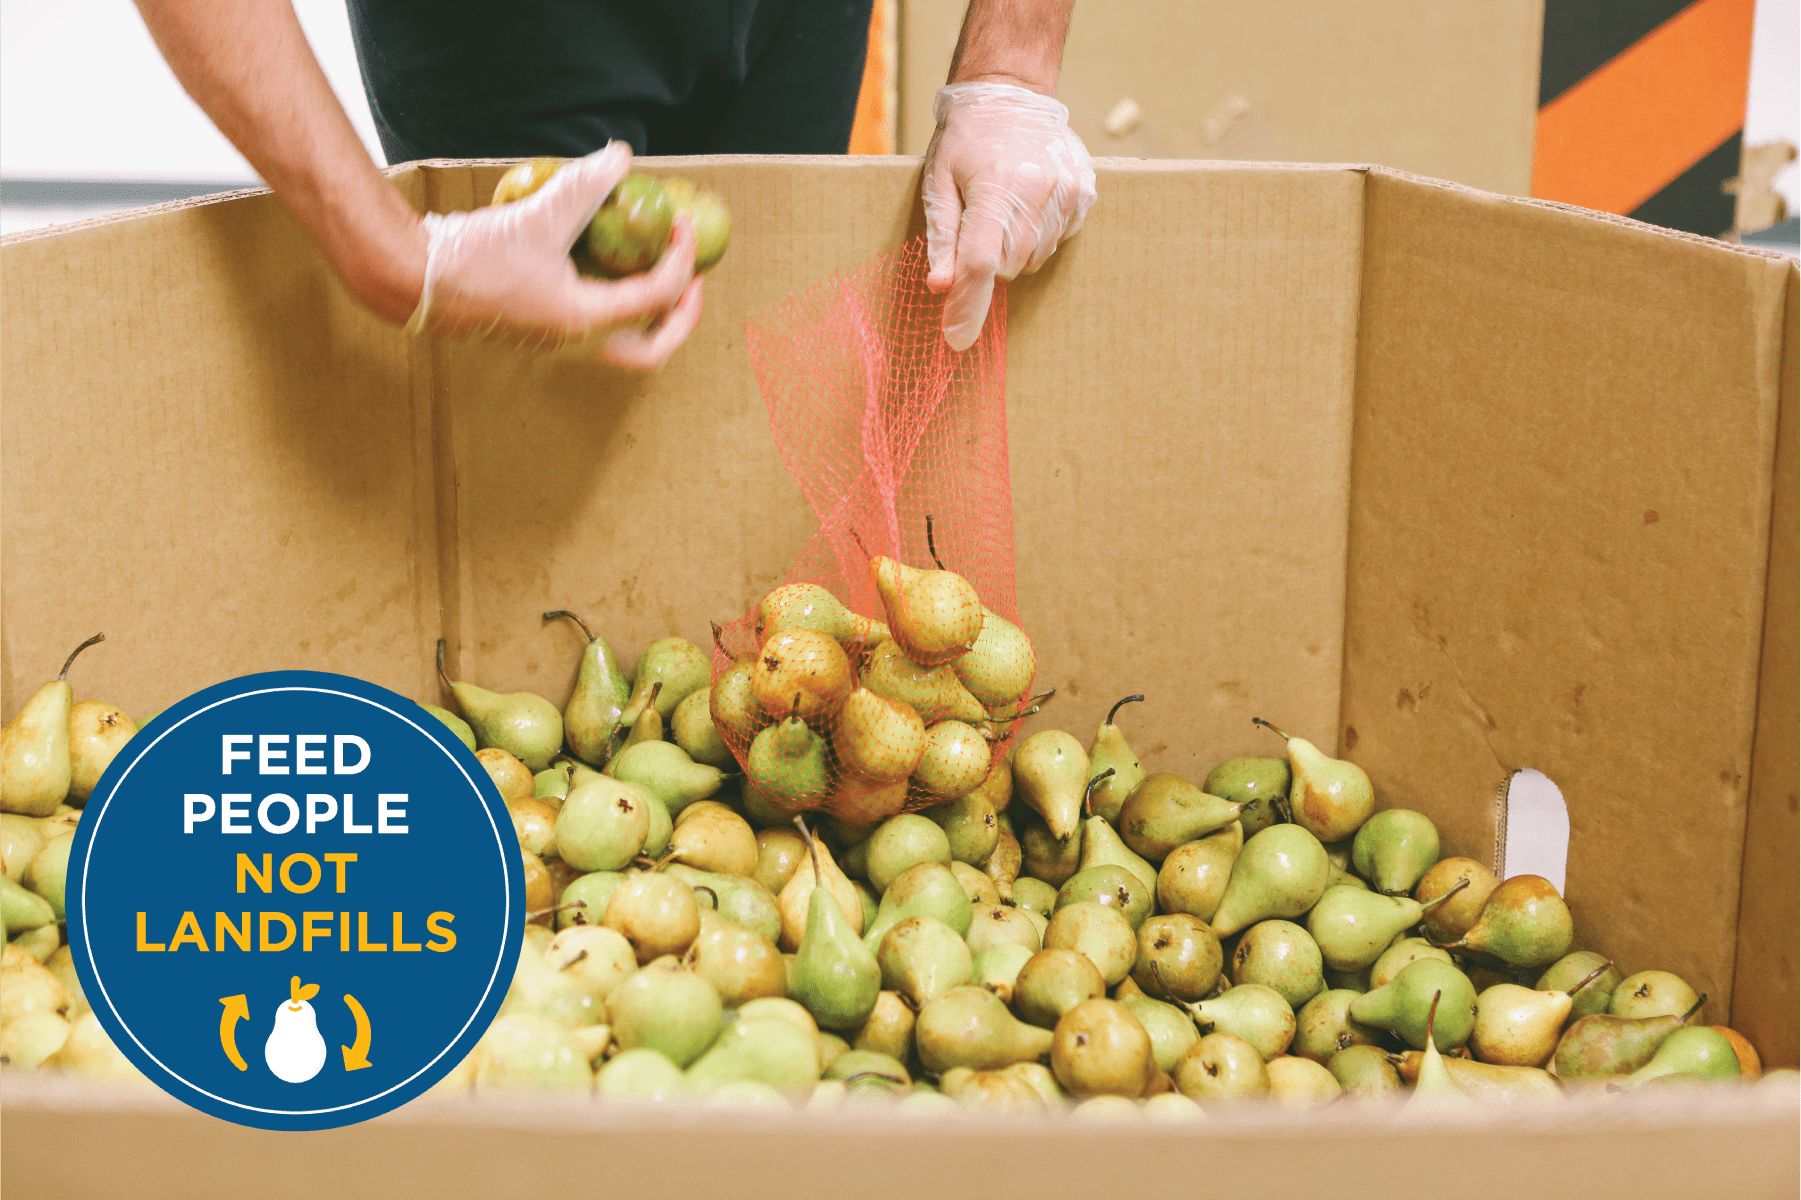 Volunteer gleans pears at Feeding San Diego distribution center with logo for Feeding San Diego campaign Feed People Not Landfills